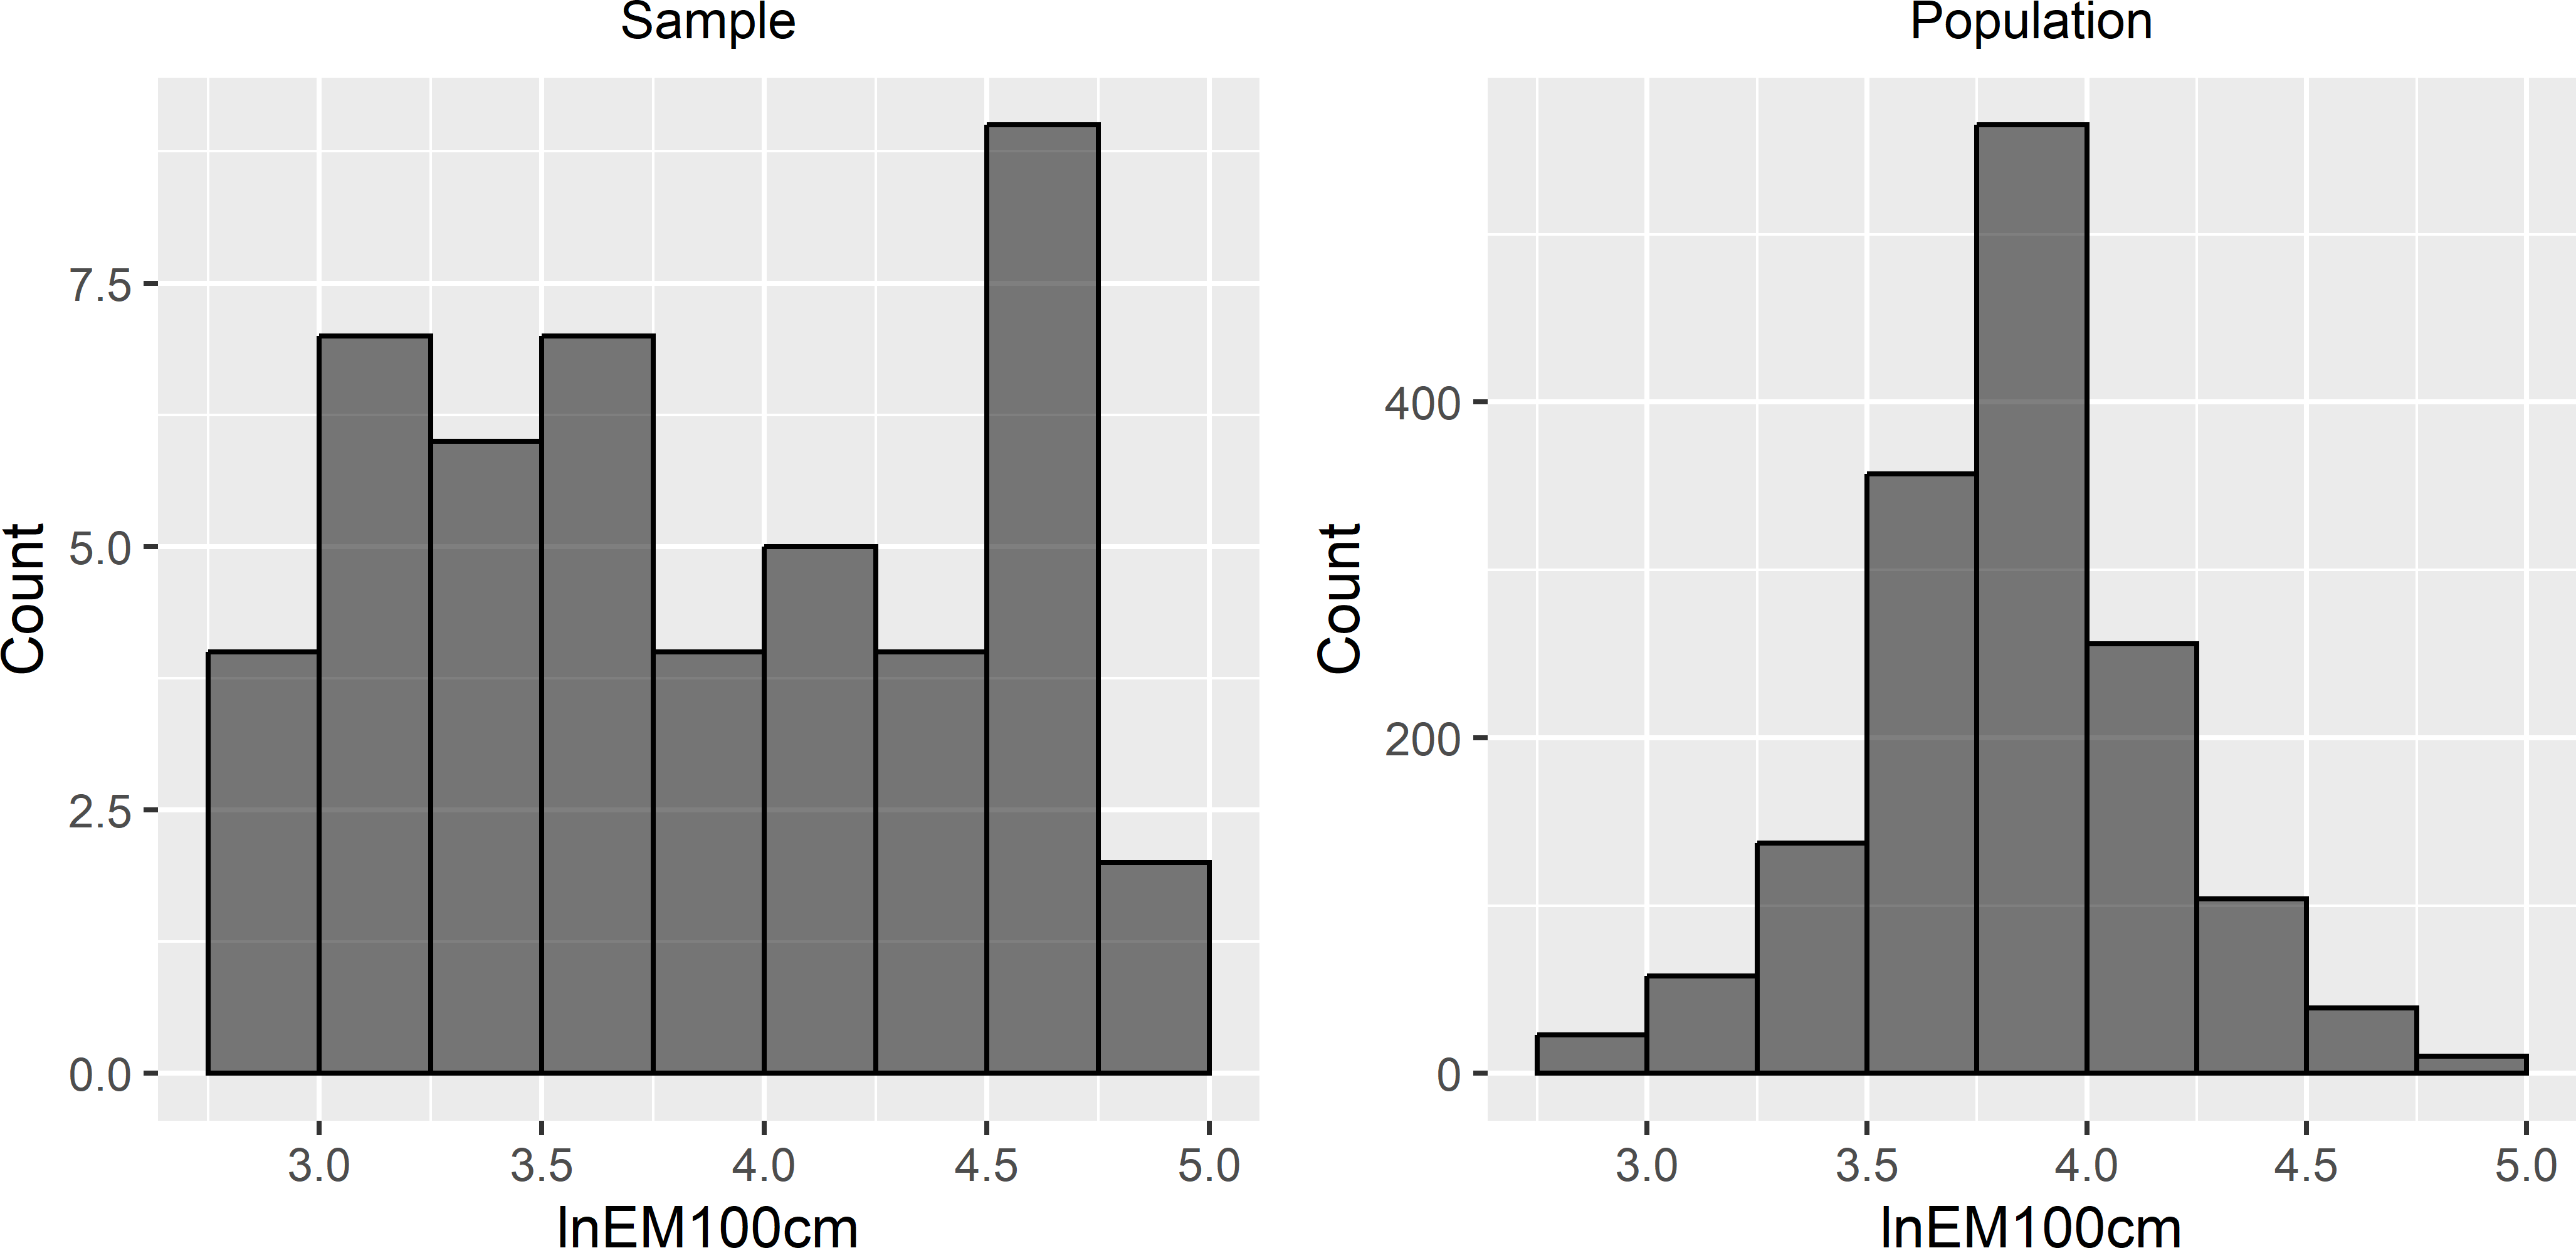 Sample frequency distribution and population frequency distribution of lnEM100cm used as covariate in model-based optimisation of the sampling pattern for mapping with KED.